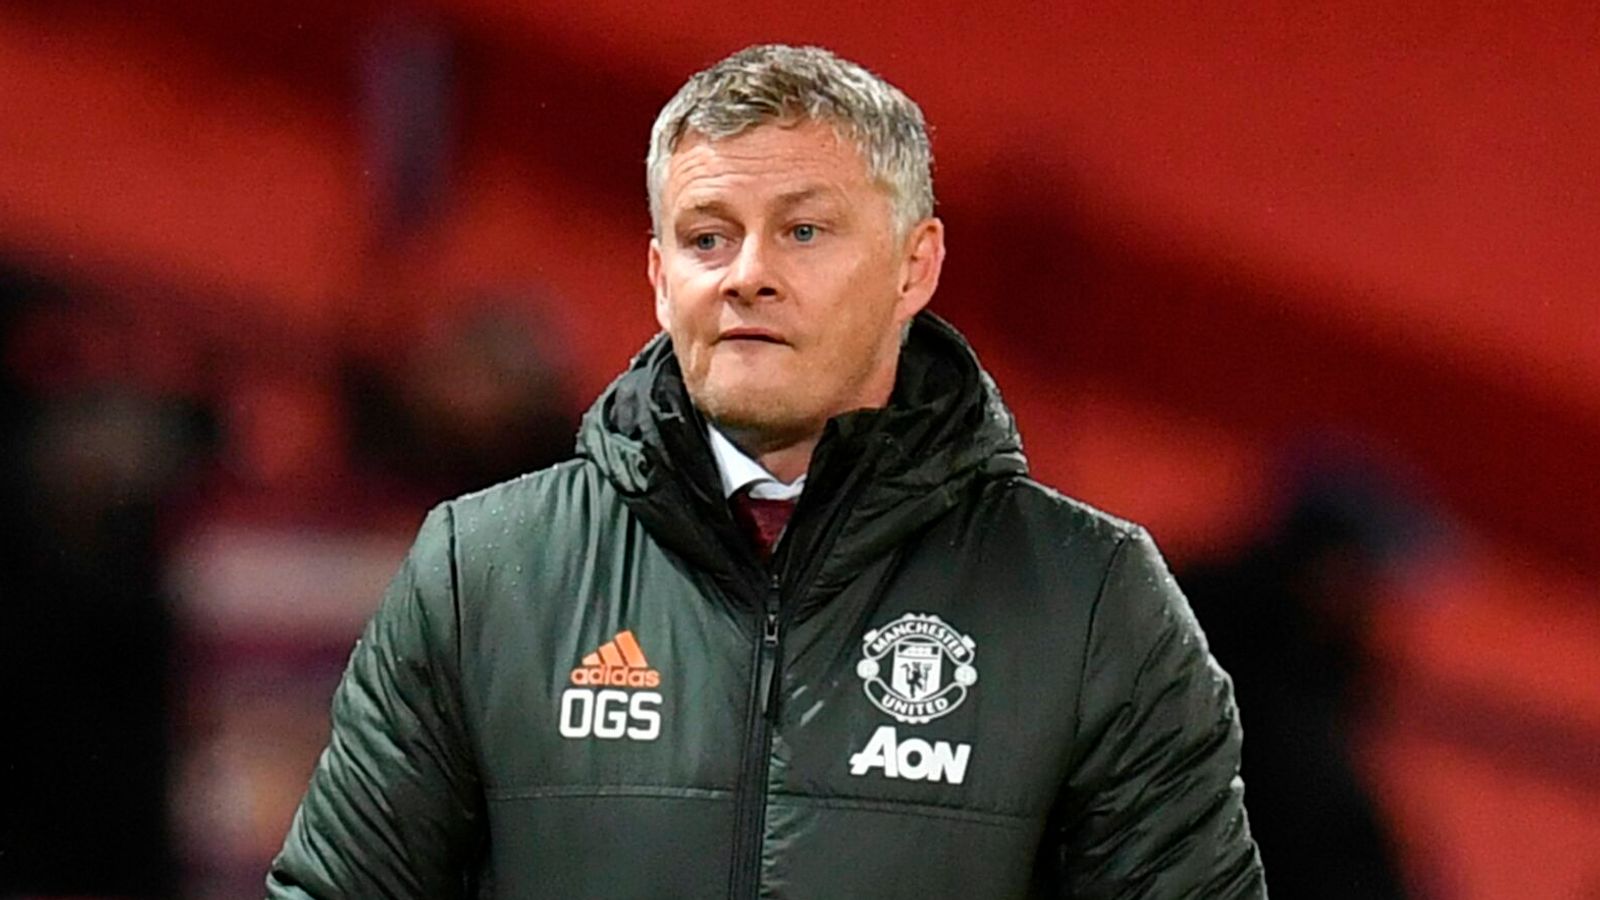 ole-gunnar-solskjaer-manchester-united-manager-says-he-always-listens-to-roy-keane-after-recent-criticism